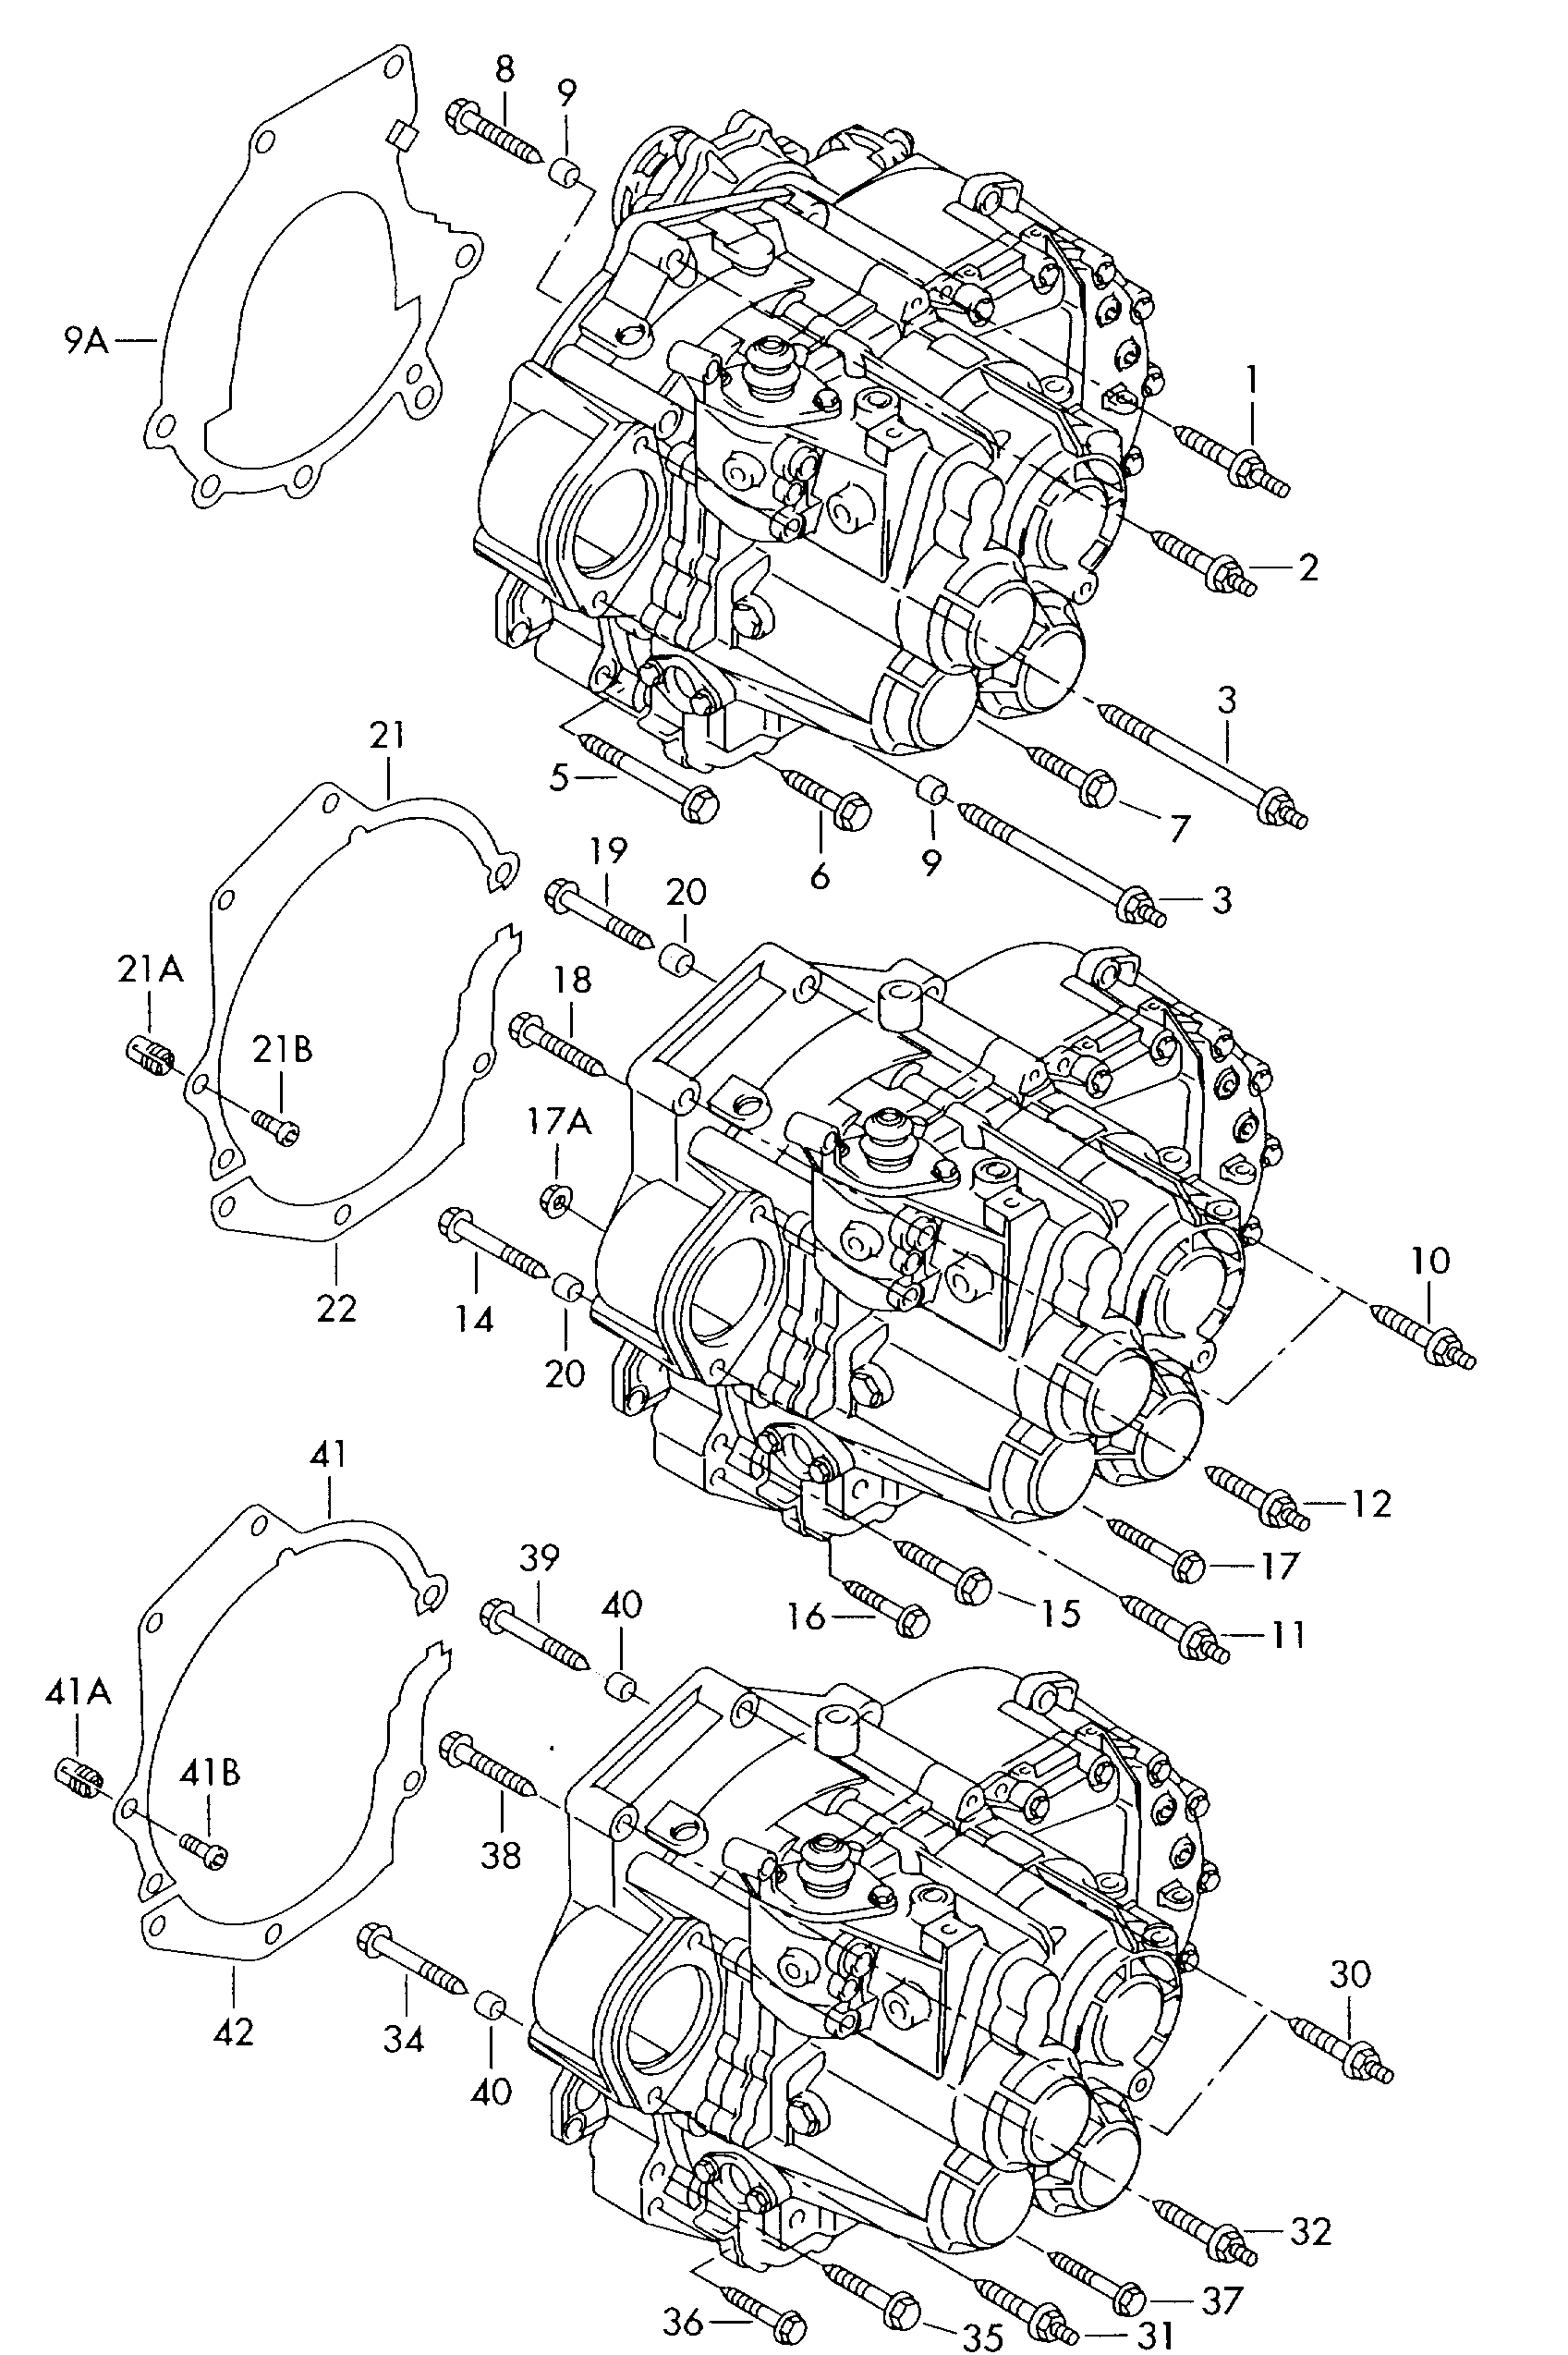 mounting parts for engine and<br>transmissionfor 6 speed manual gearbox 4 cylinder - Octavia - oct